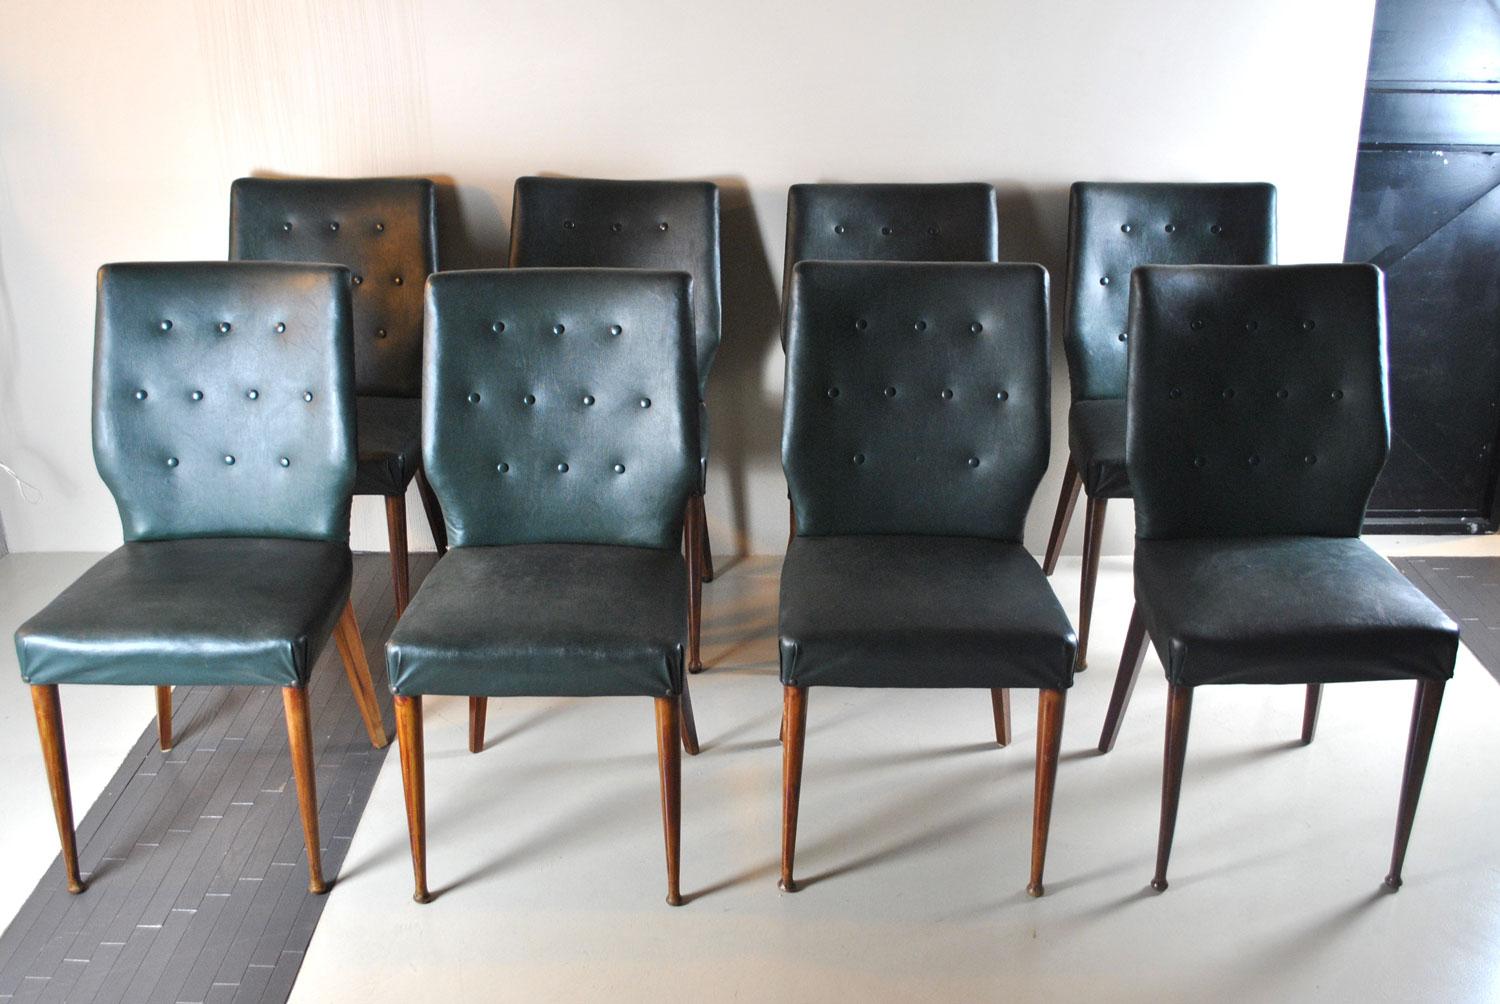 Italian midcentury set of eighty 1960s chairs in green faux leather in very good condition.
the olive green colour makes the chairs very elegant around a period table.